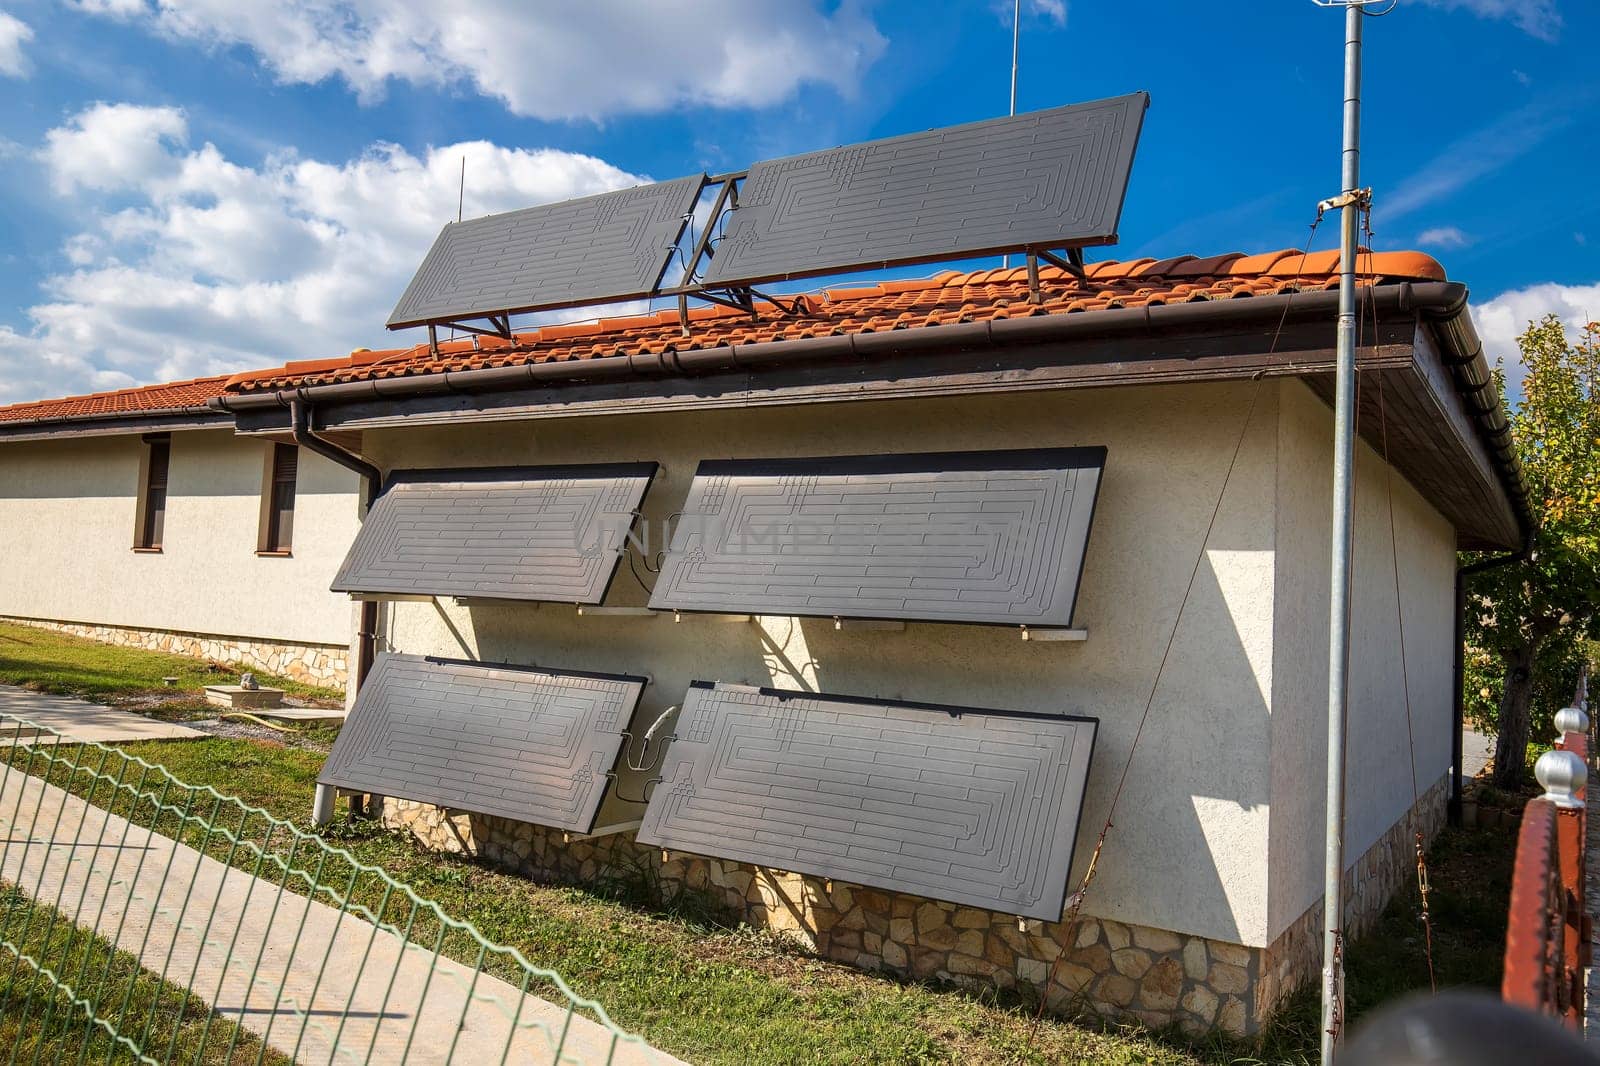 A new modern solar water heater was installed on the wall and roof of a house for heating of water.  by EdVal